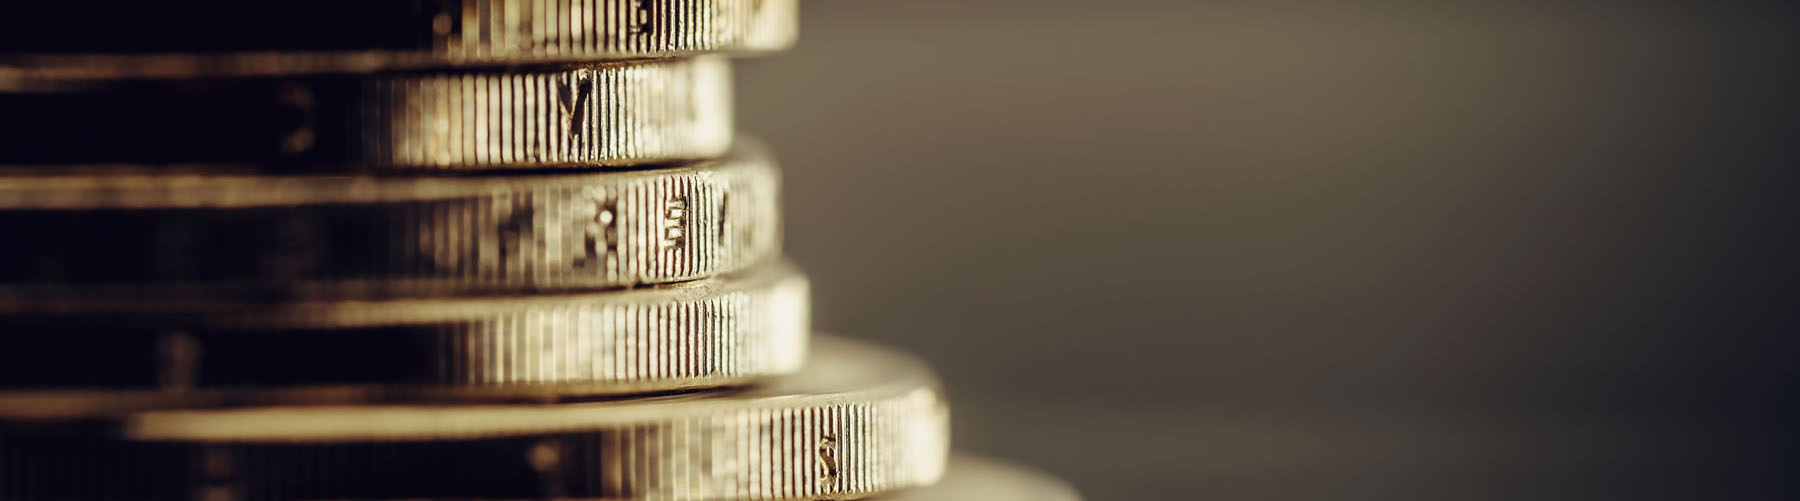 Close up view of a stack of coins